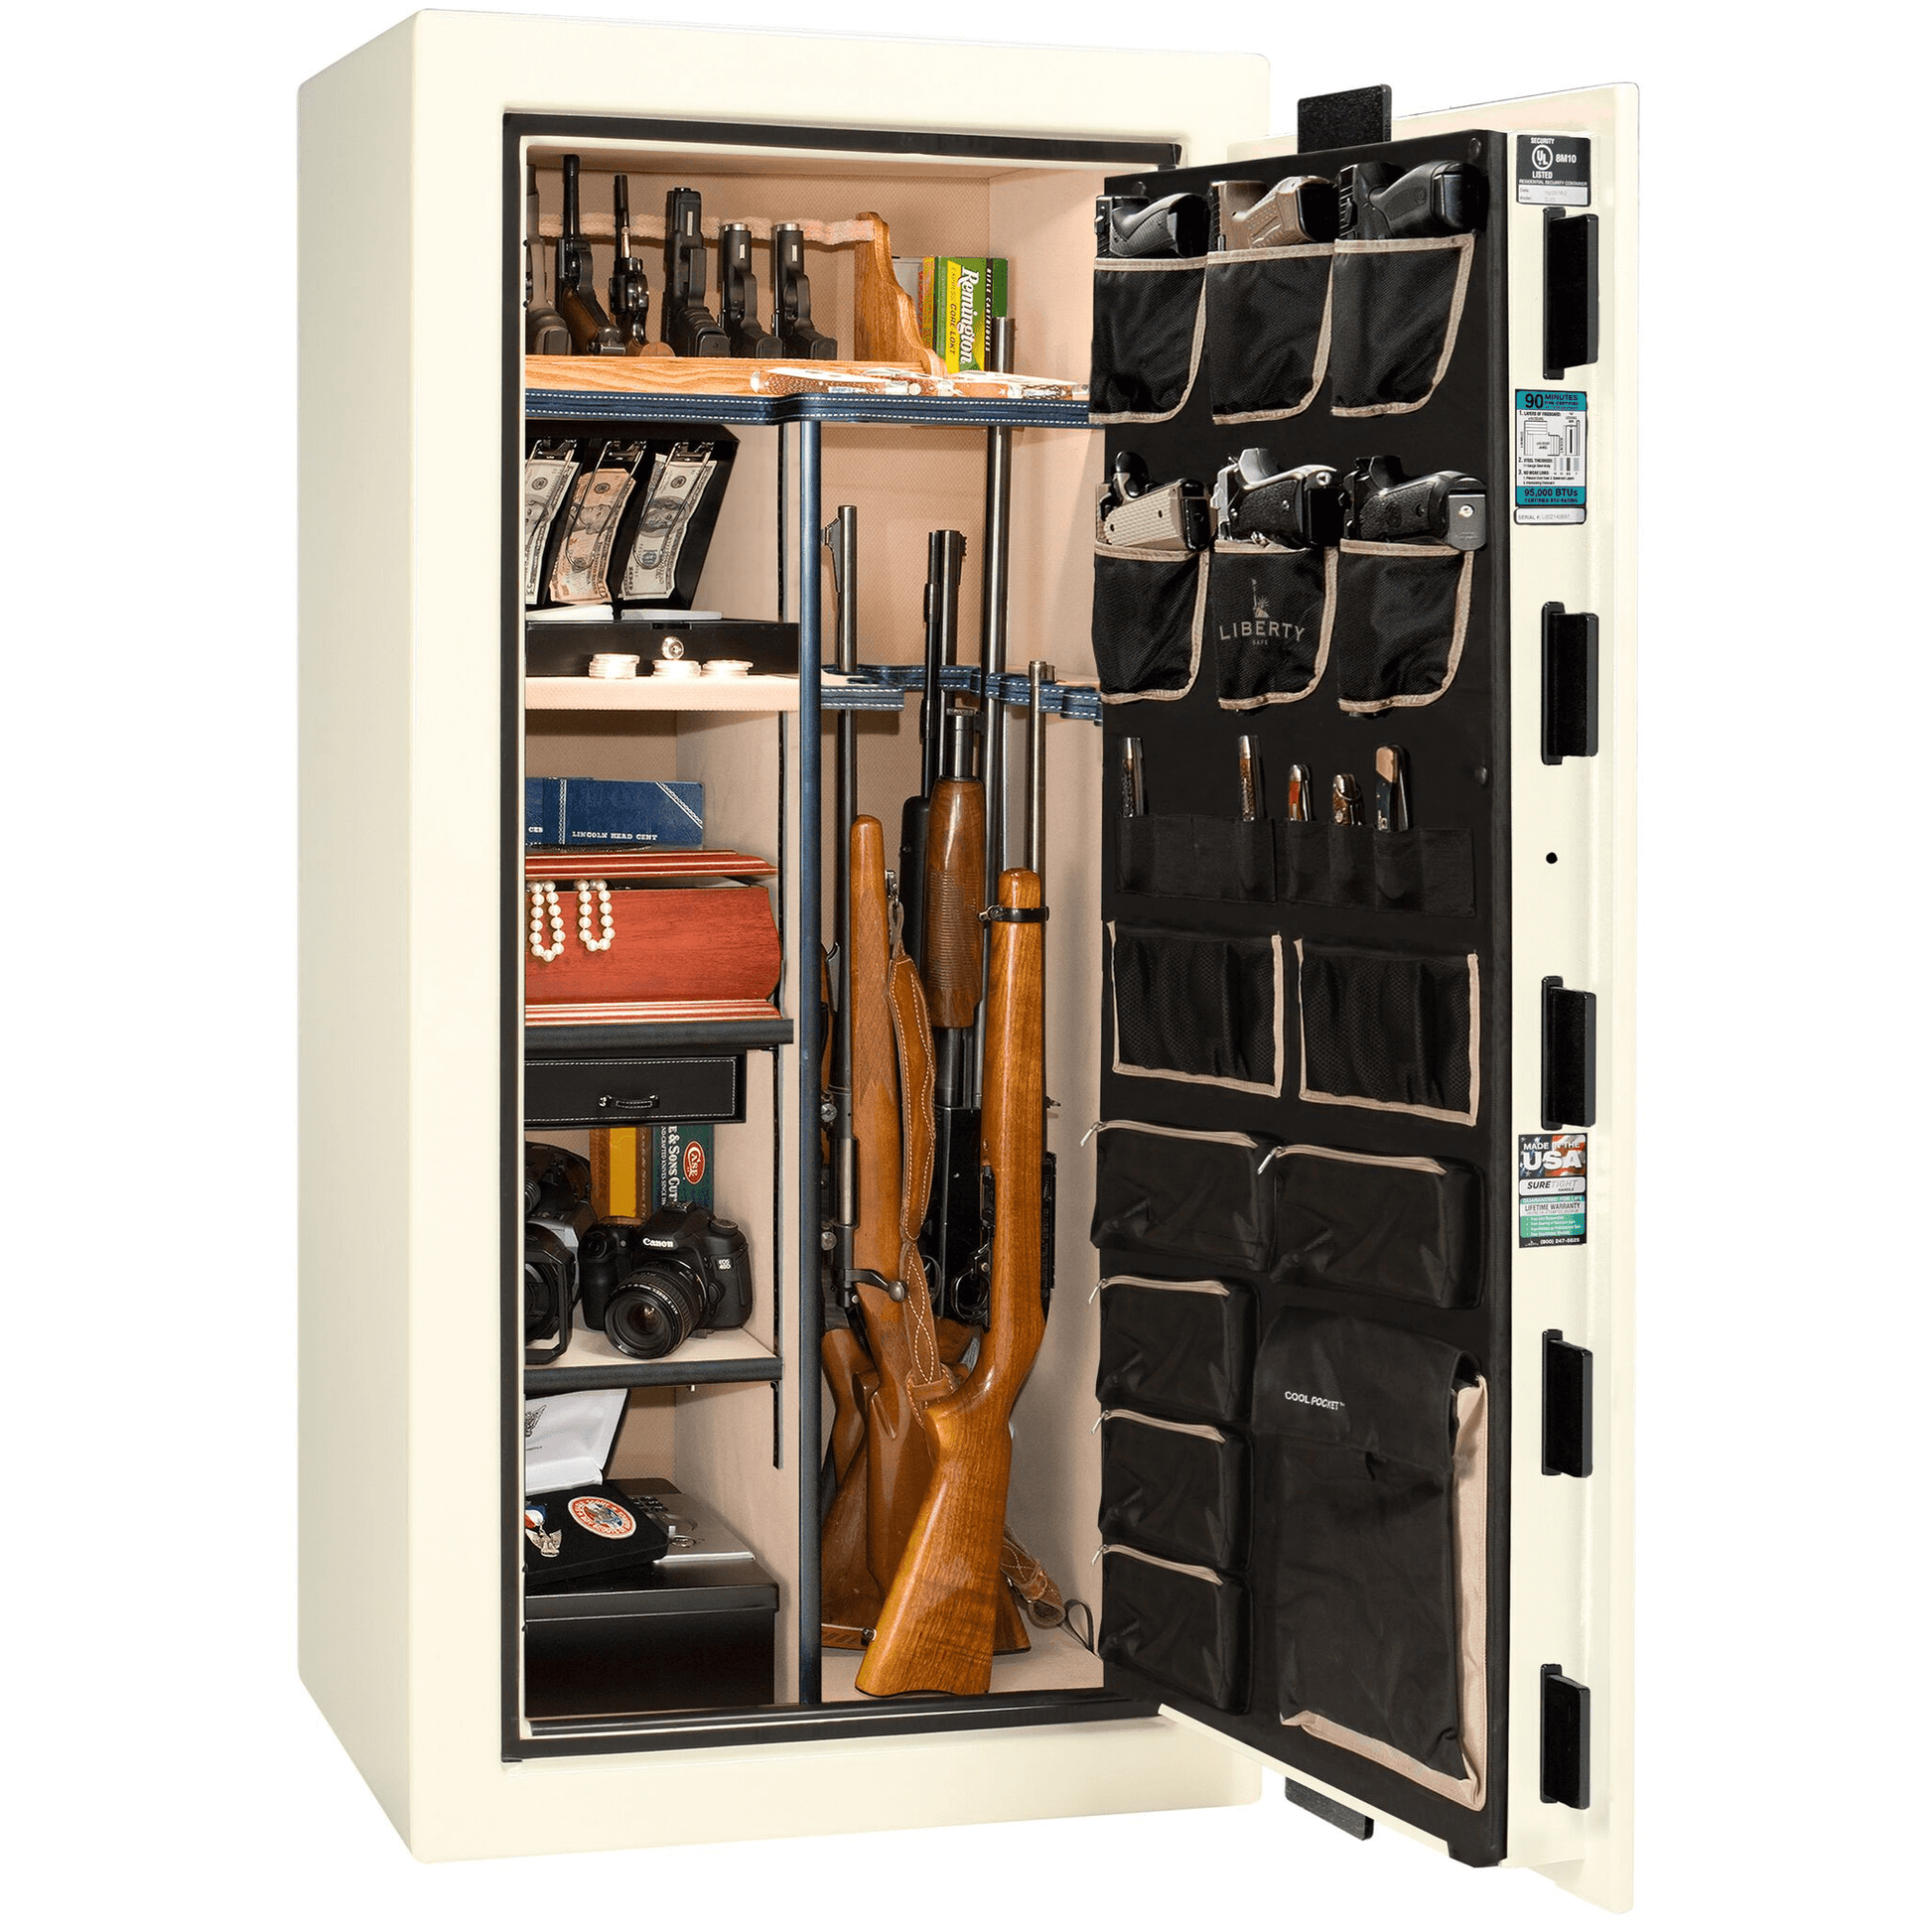 Lincoln Series | Level 5 Security | 110 Minute Fire Protection | 40 | Dimensions: 66.5"(H) x 36"(W) x 32"(D) | Bronze Textured | Electronic Lock